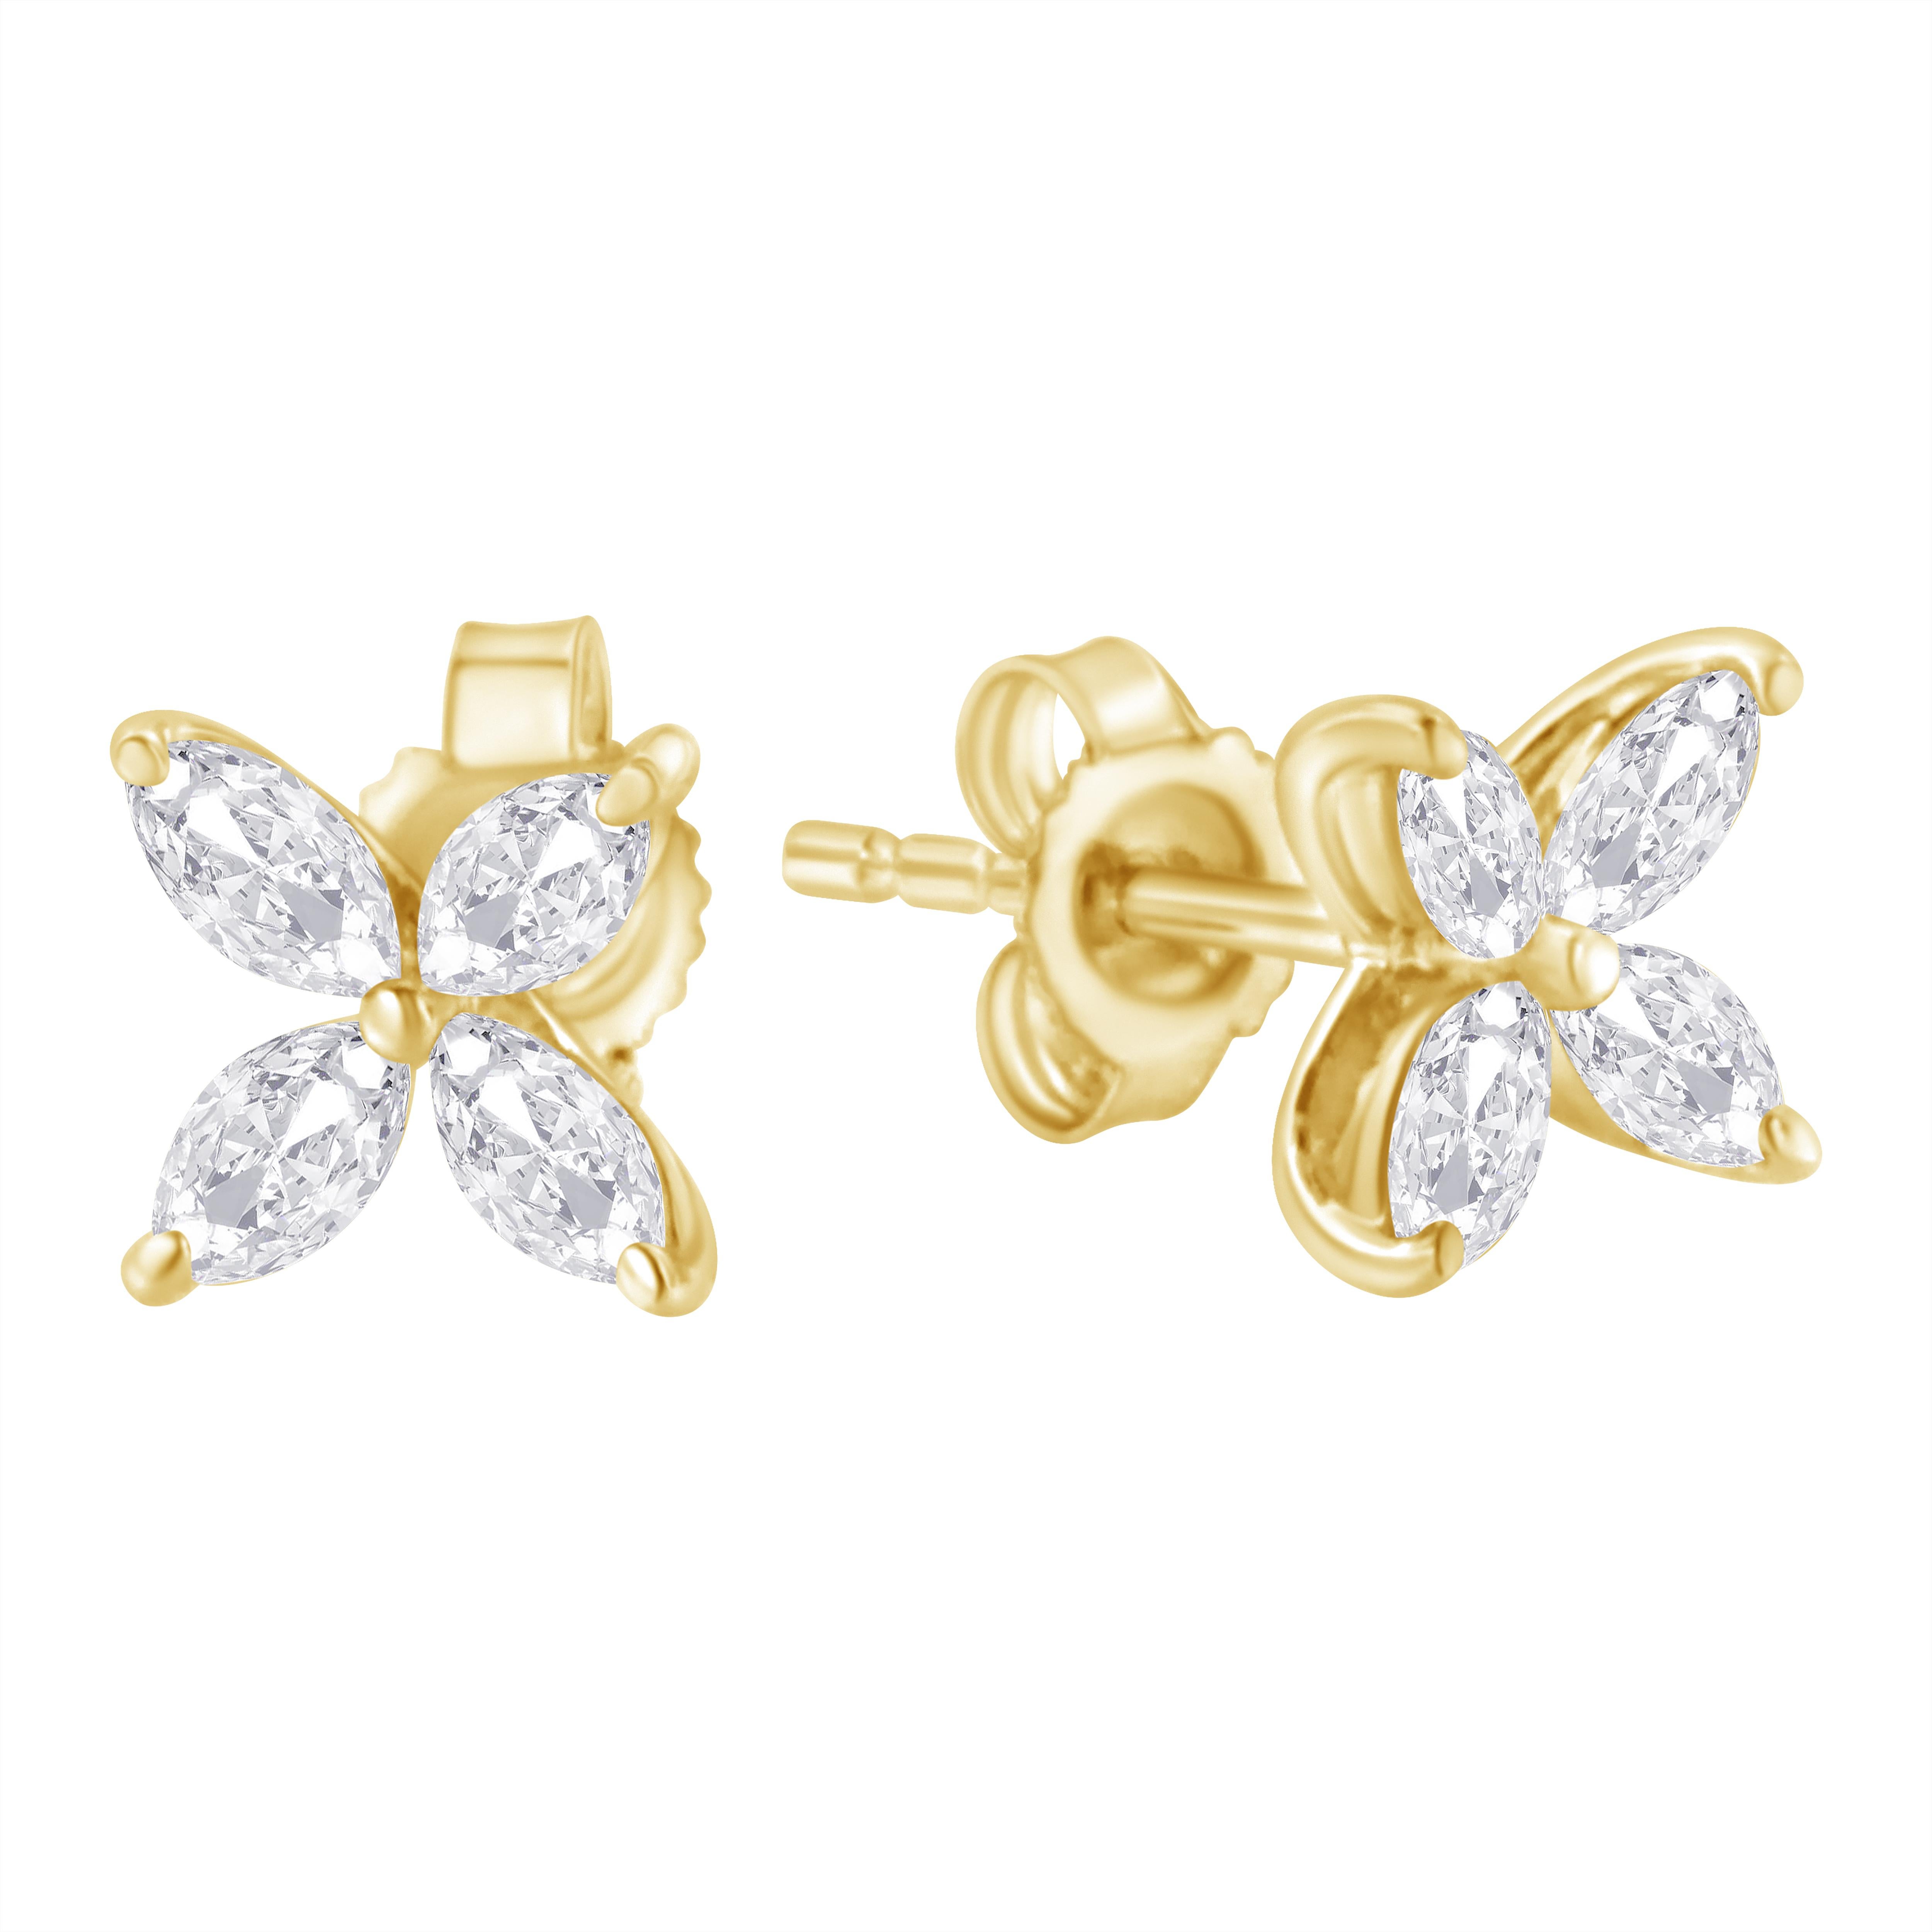 The classic arrangement of 8 stunning, earth mined marquise diamonds make these studs an instant classic. These studs are crafted out of stunning 14k yellow gold and set with 8 high-quality, genuine marquise diamonds in a floral arrangement. The